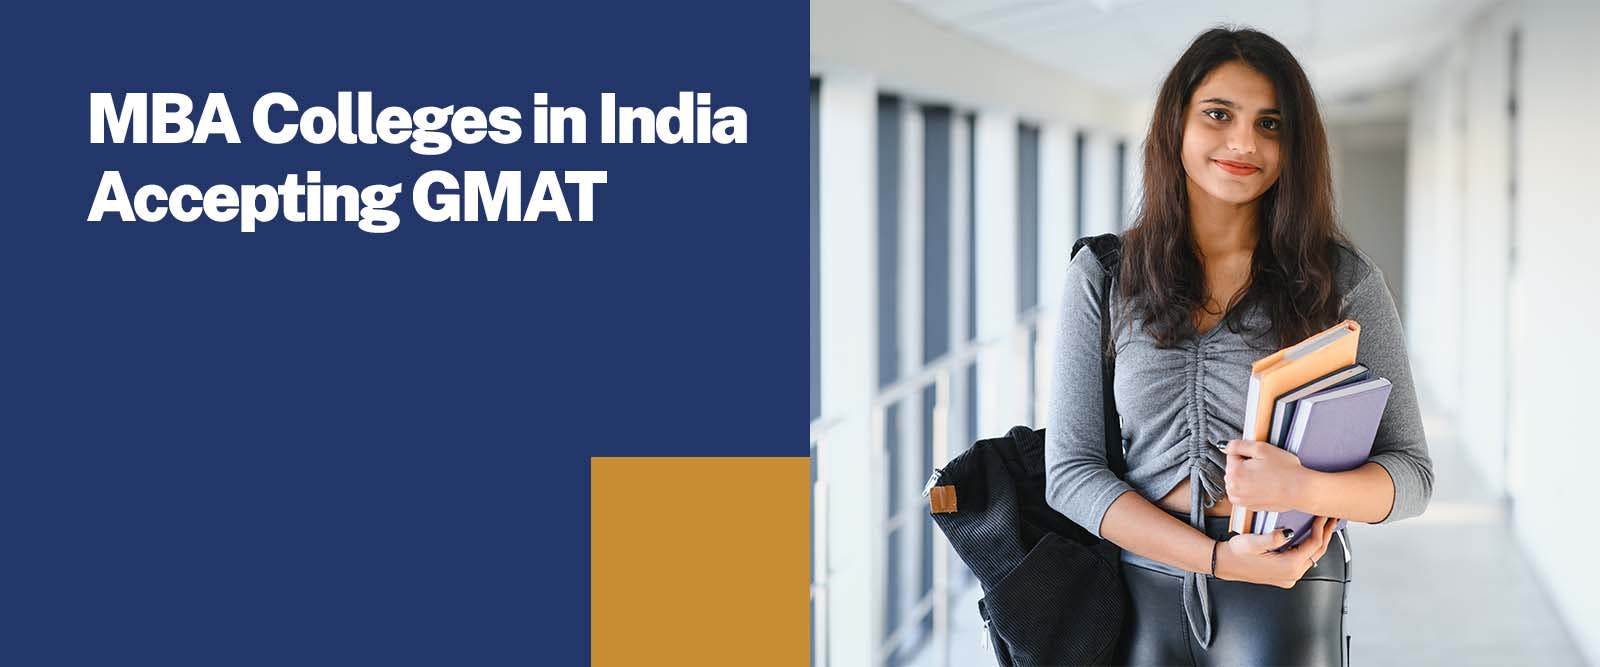 MBA Colleges in India Accepting GMAT